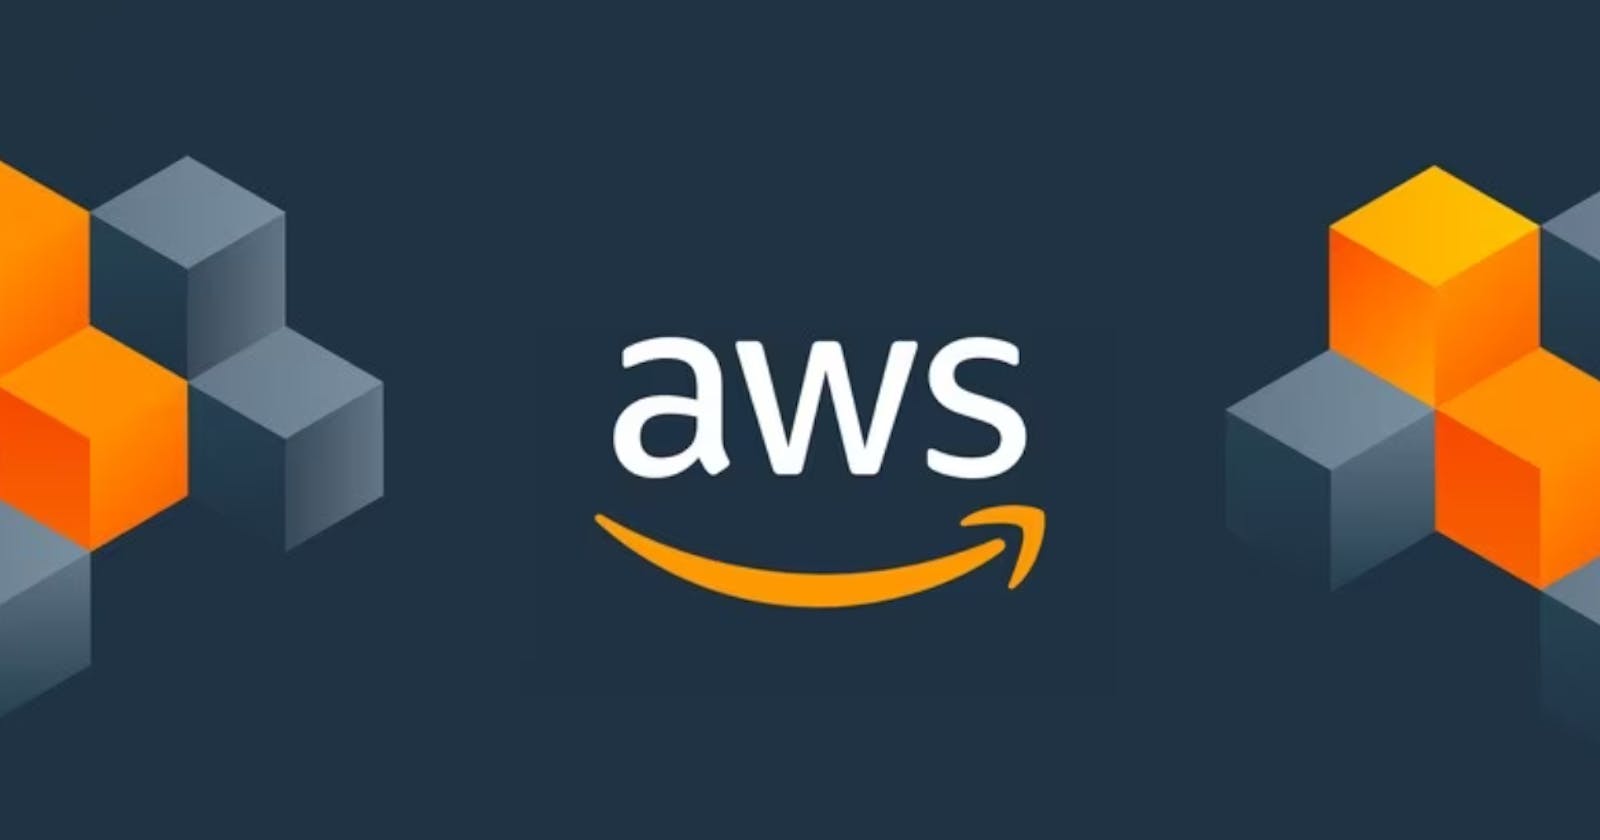 Amazon Web Services (AWS): Explained in a nutshell